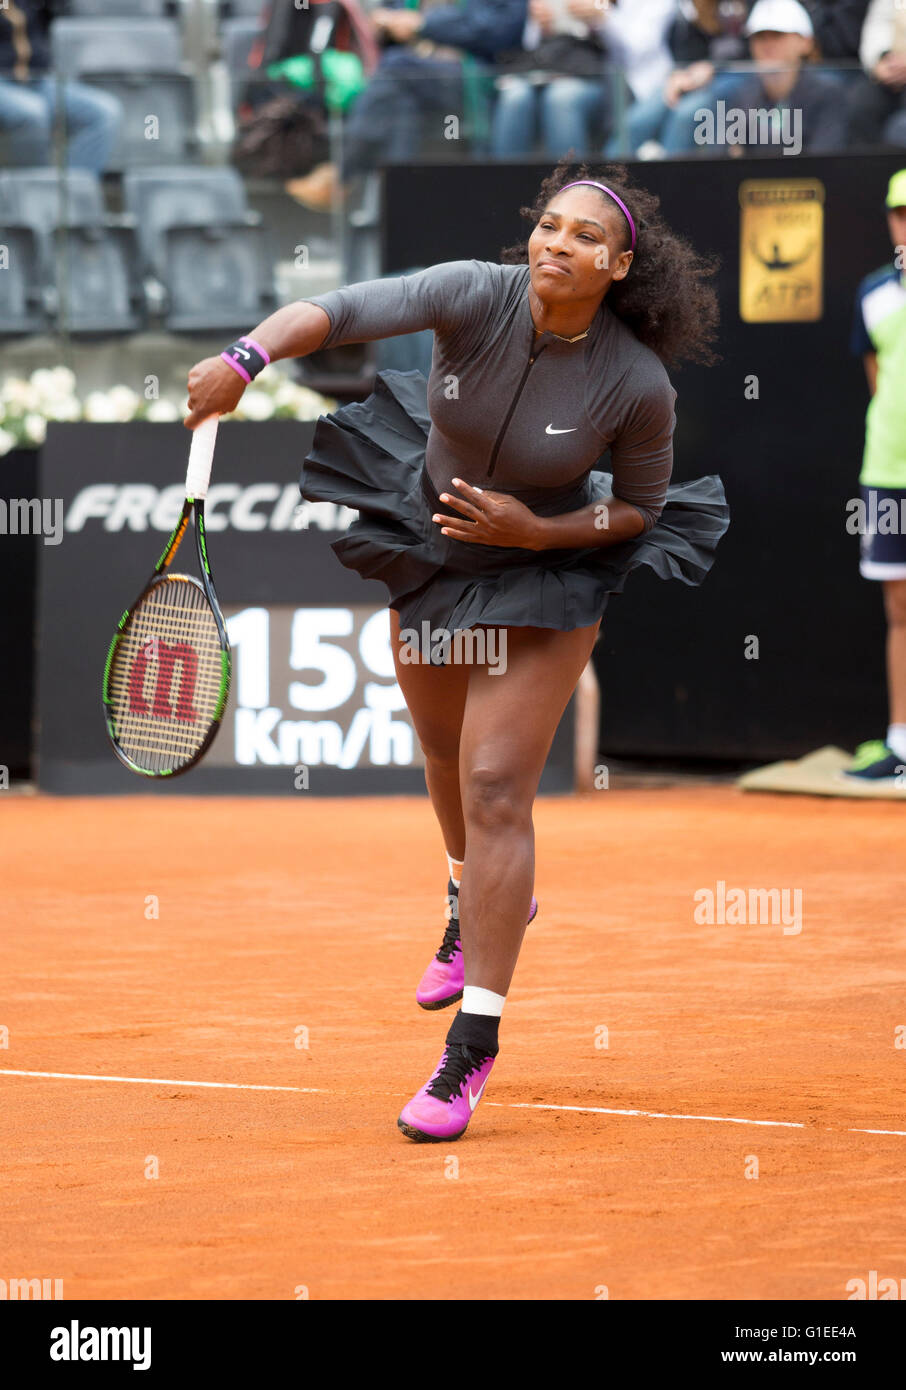 Rome, Italy. 14th May, 2016. Serena Williams serves the first ball in the semi final match at the Rome Tennis Internationals, Stock Photo